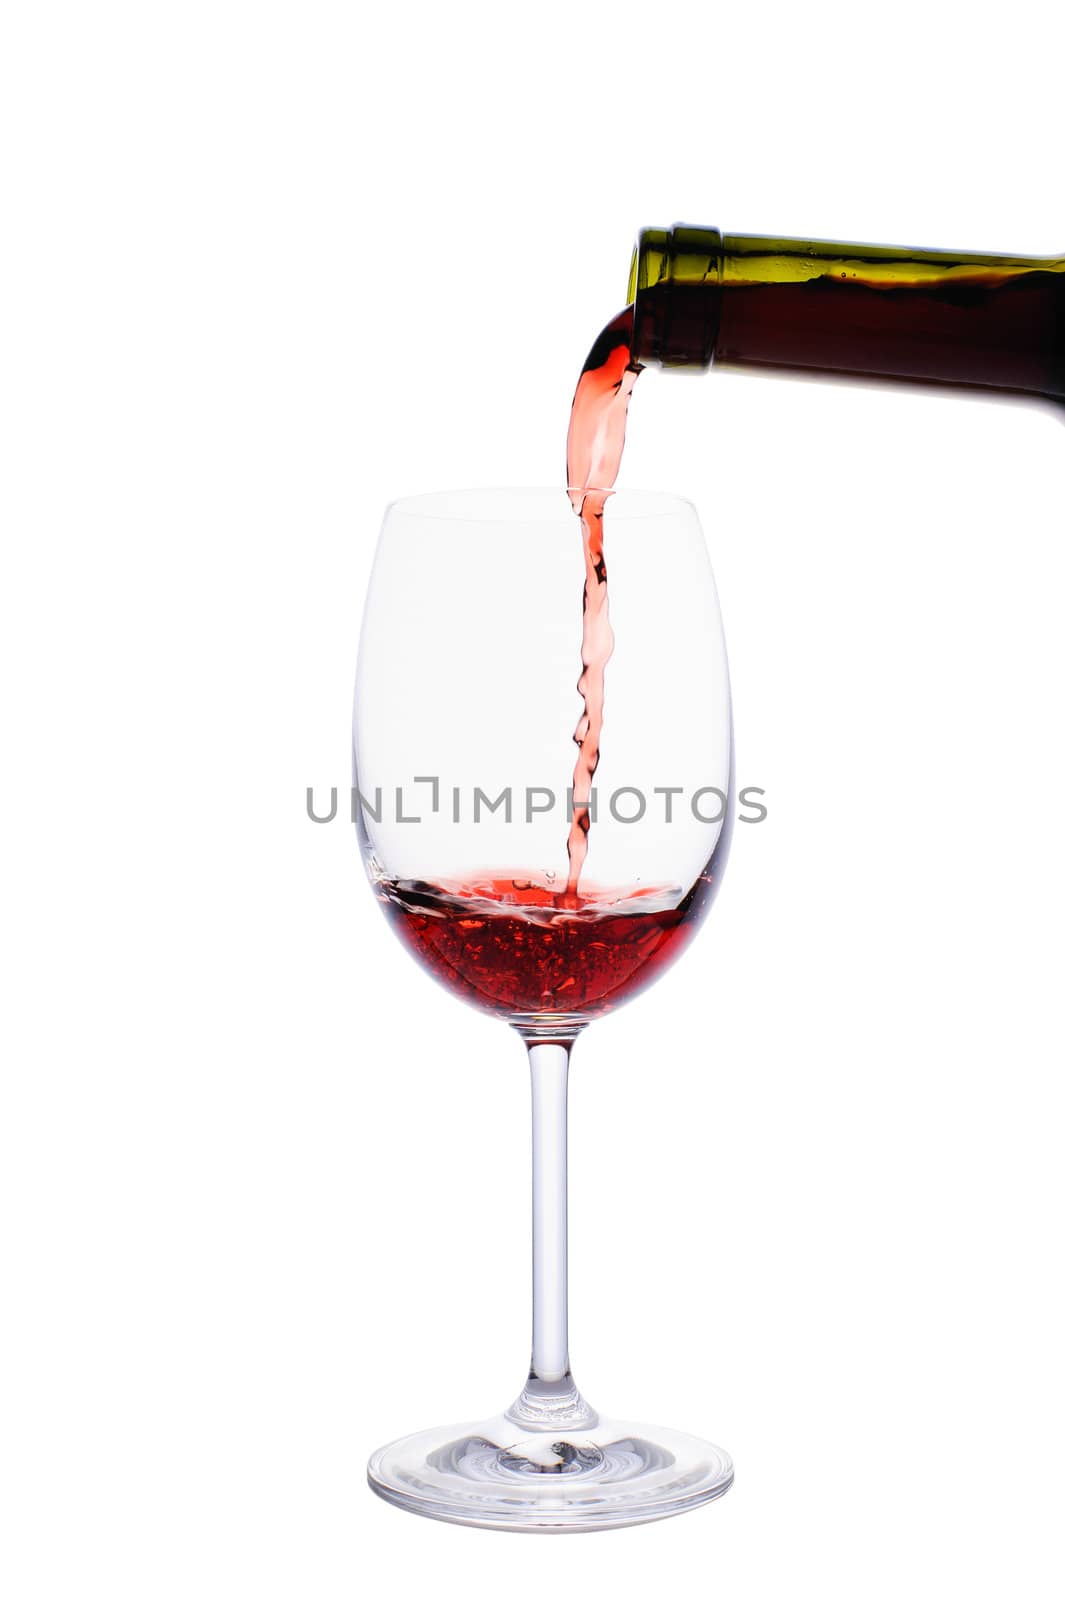 Red wine pouring into wine glass by nvelichko